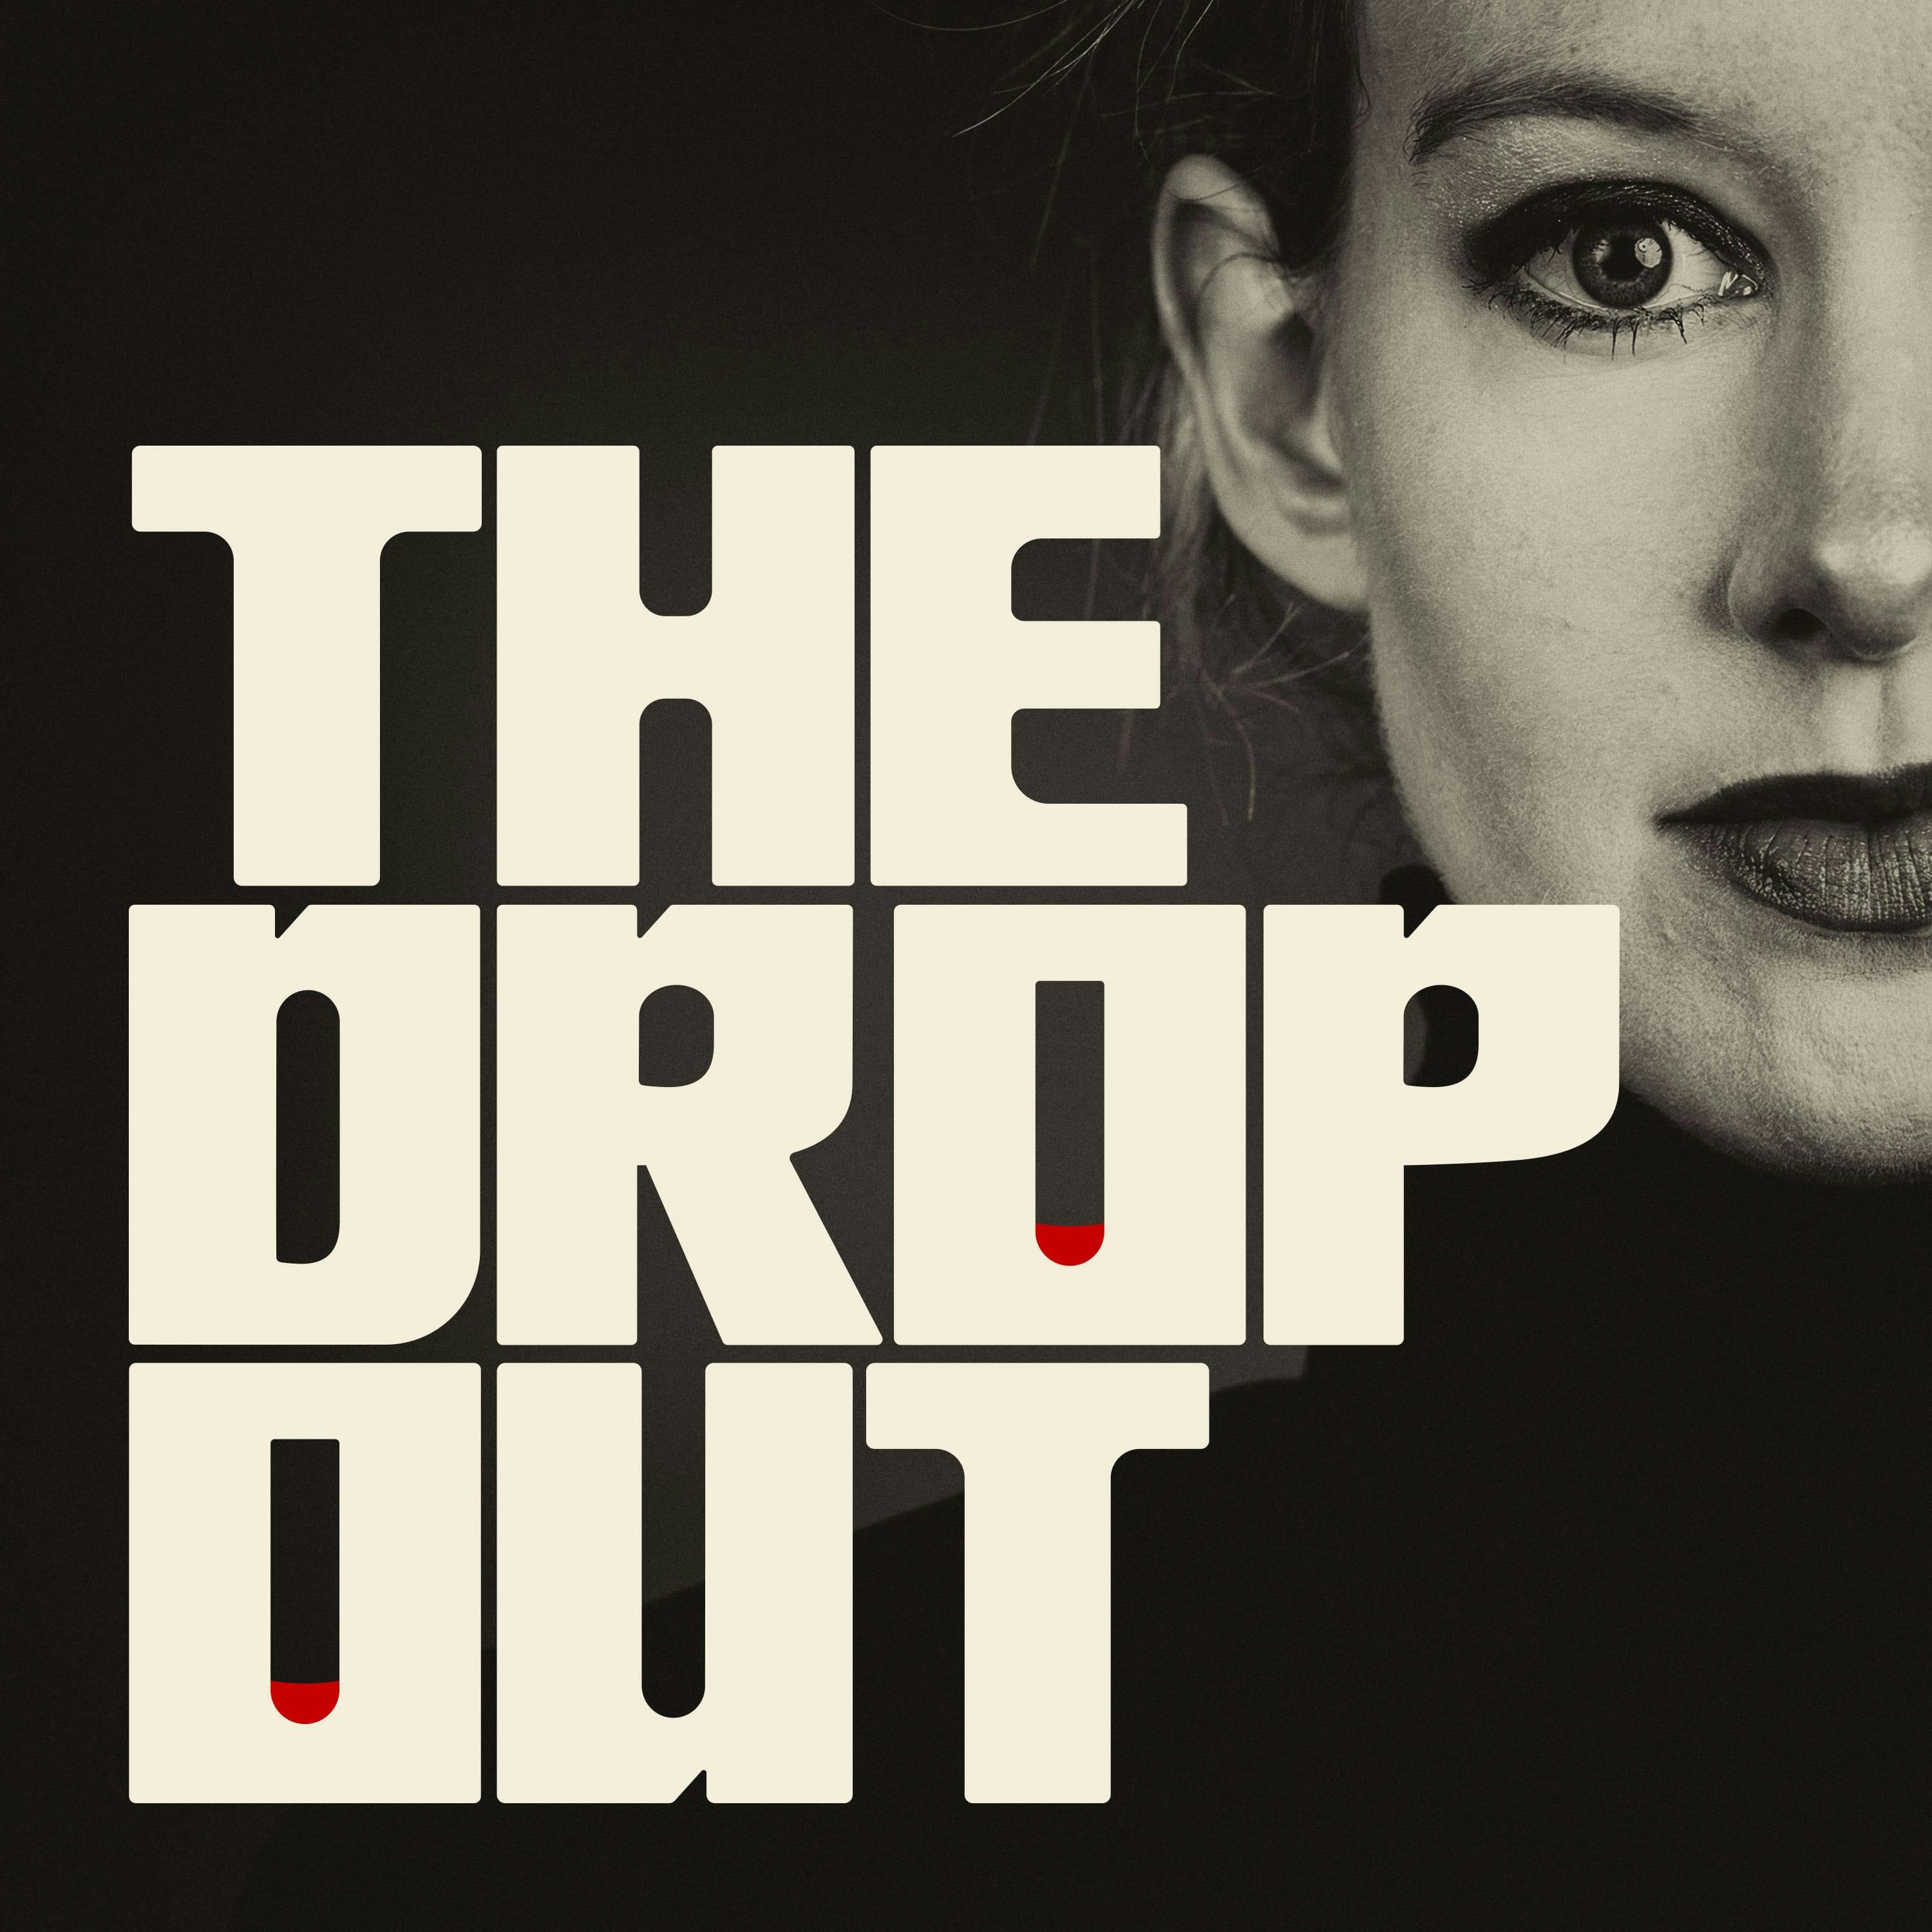 The Dropout podcast